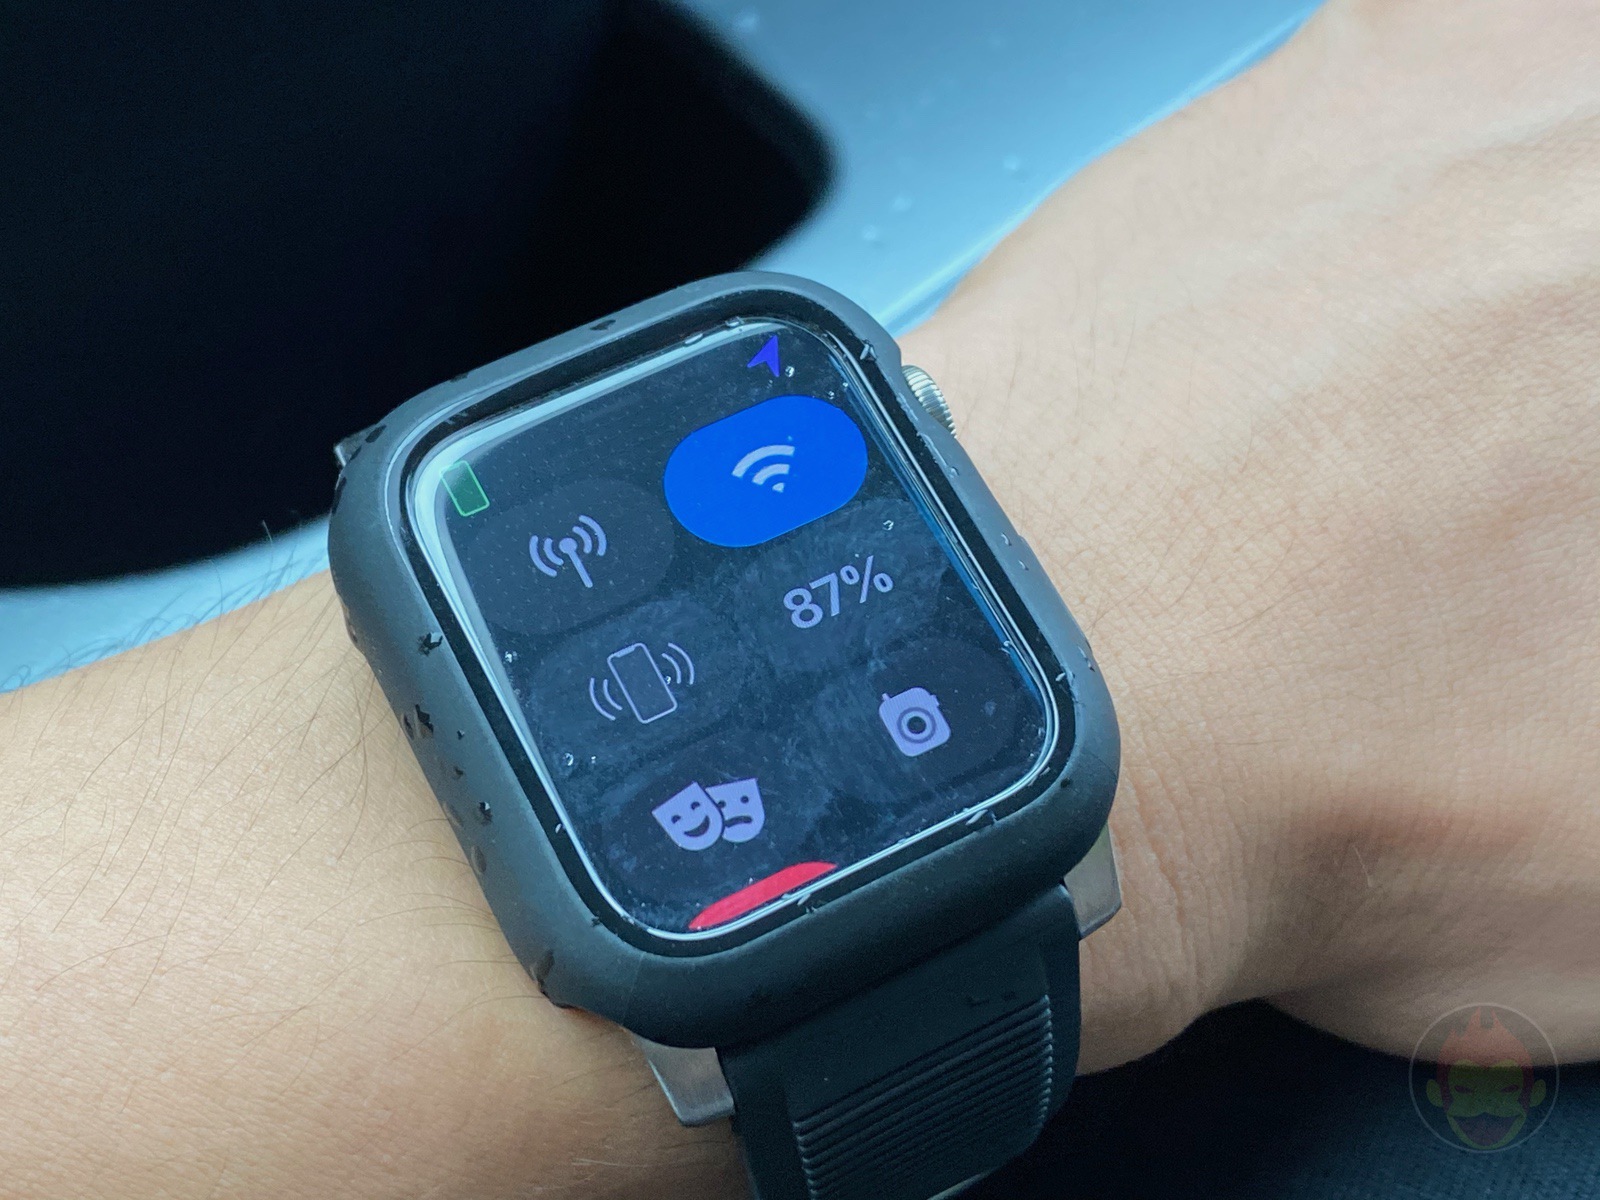 AppleWatchSeries6 With AODisplay ON 08